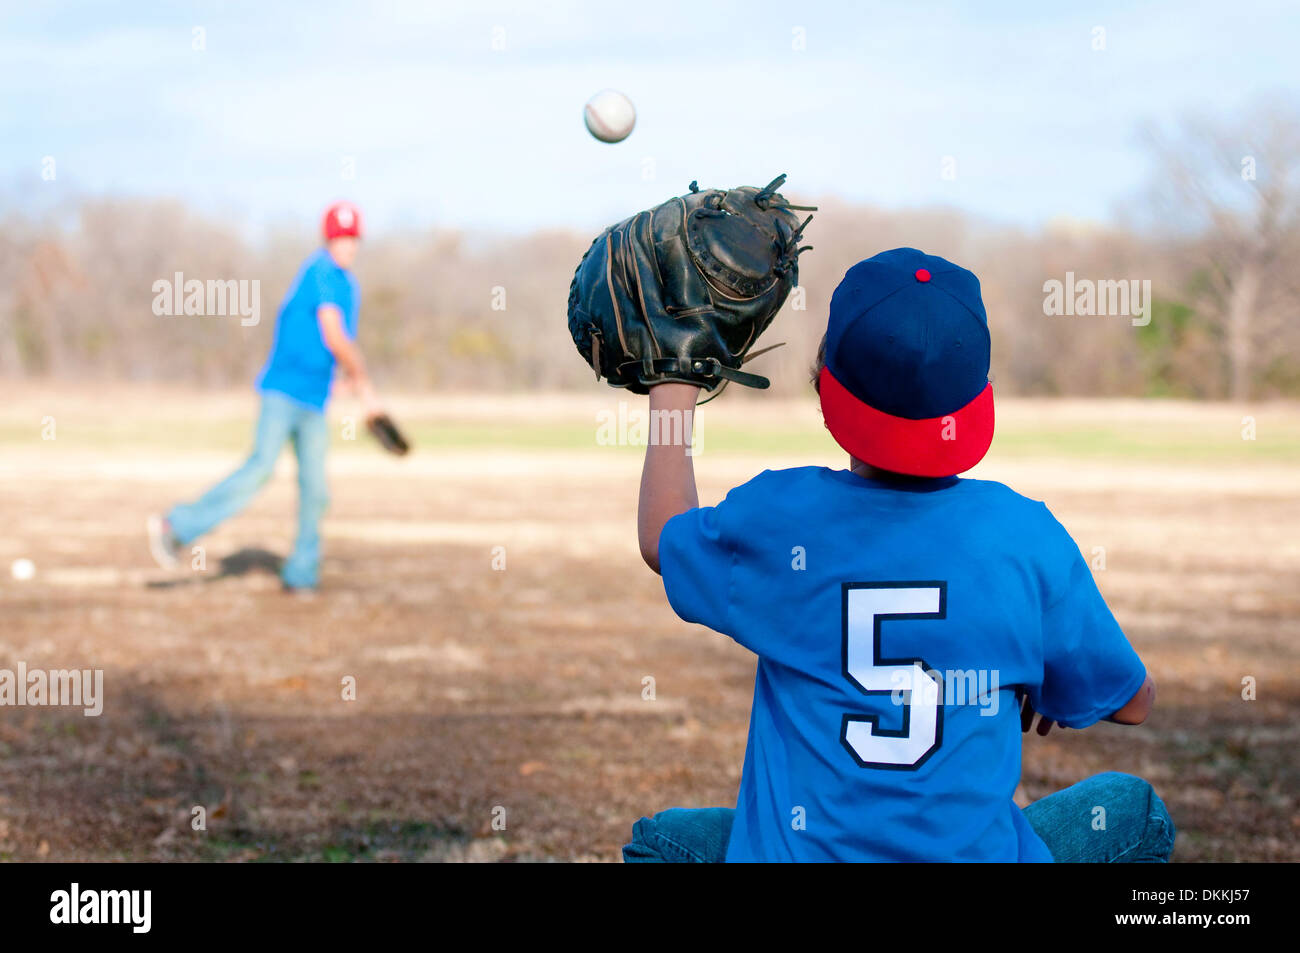 Two boys playing catch at a park. Stock Photo